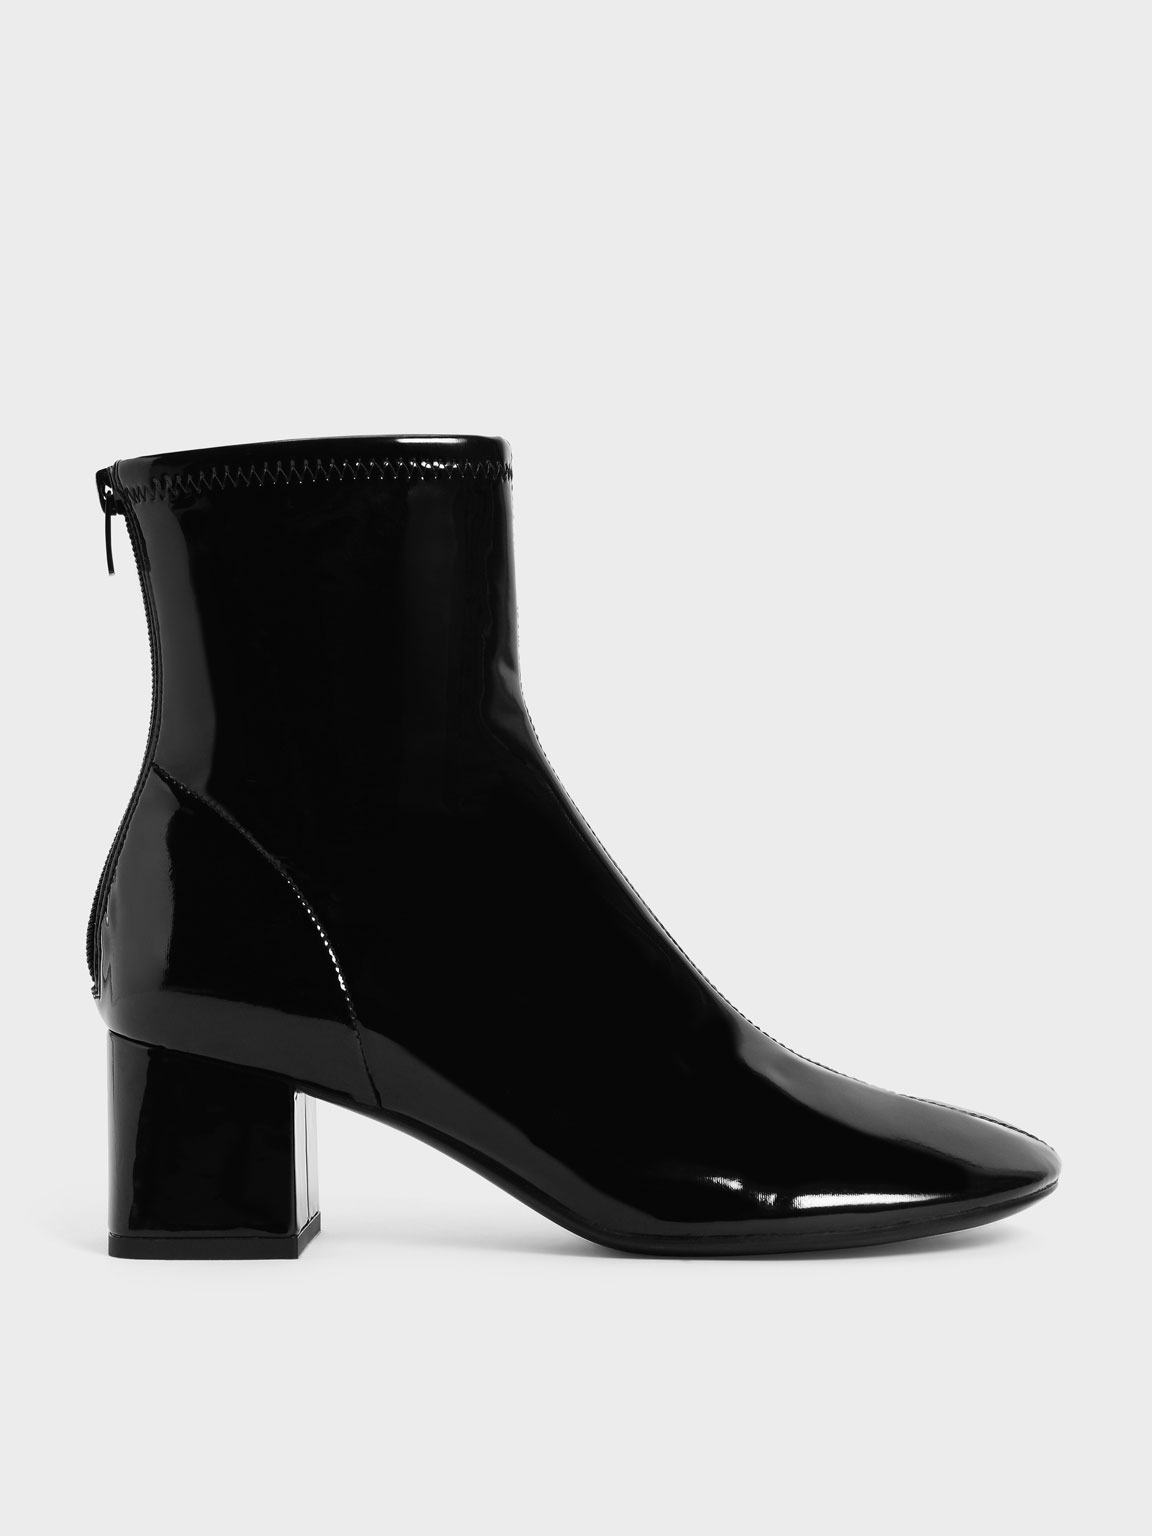 Black Patent Block Heel Ankle Boots | CHARLES & KEITH UK